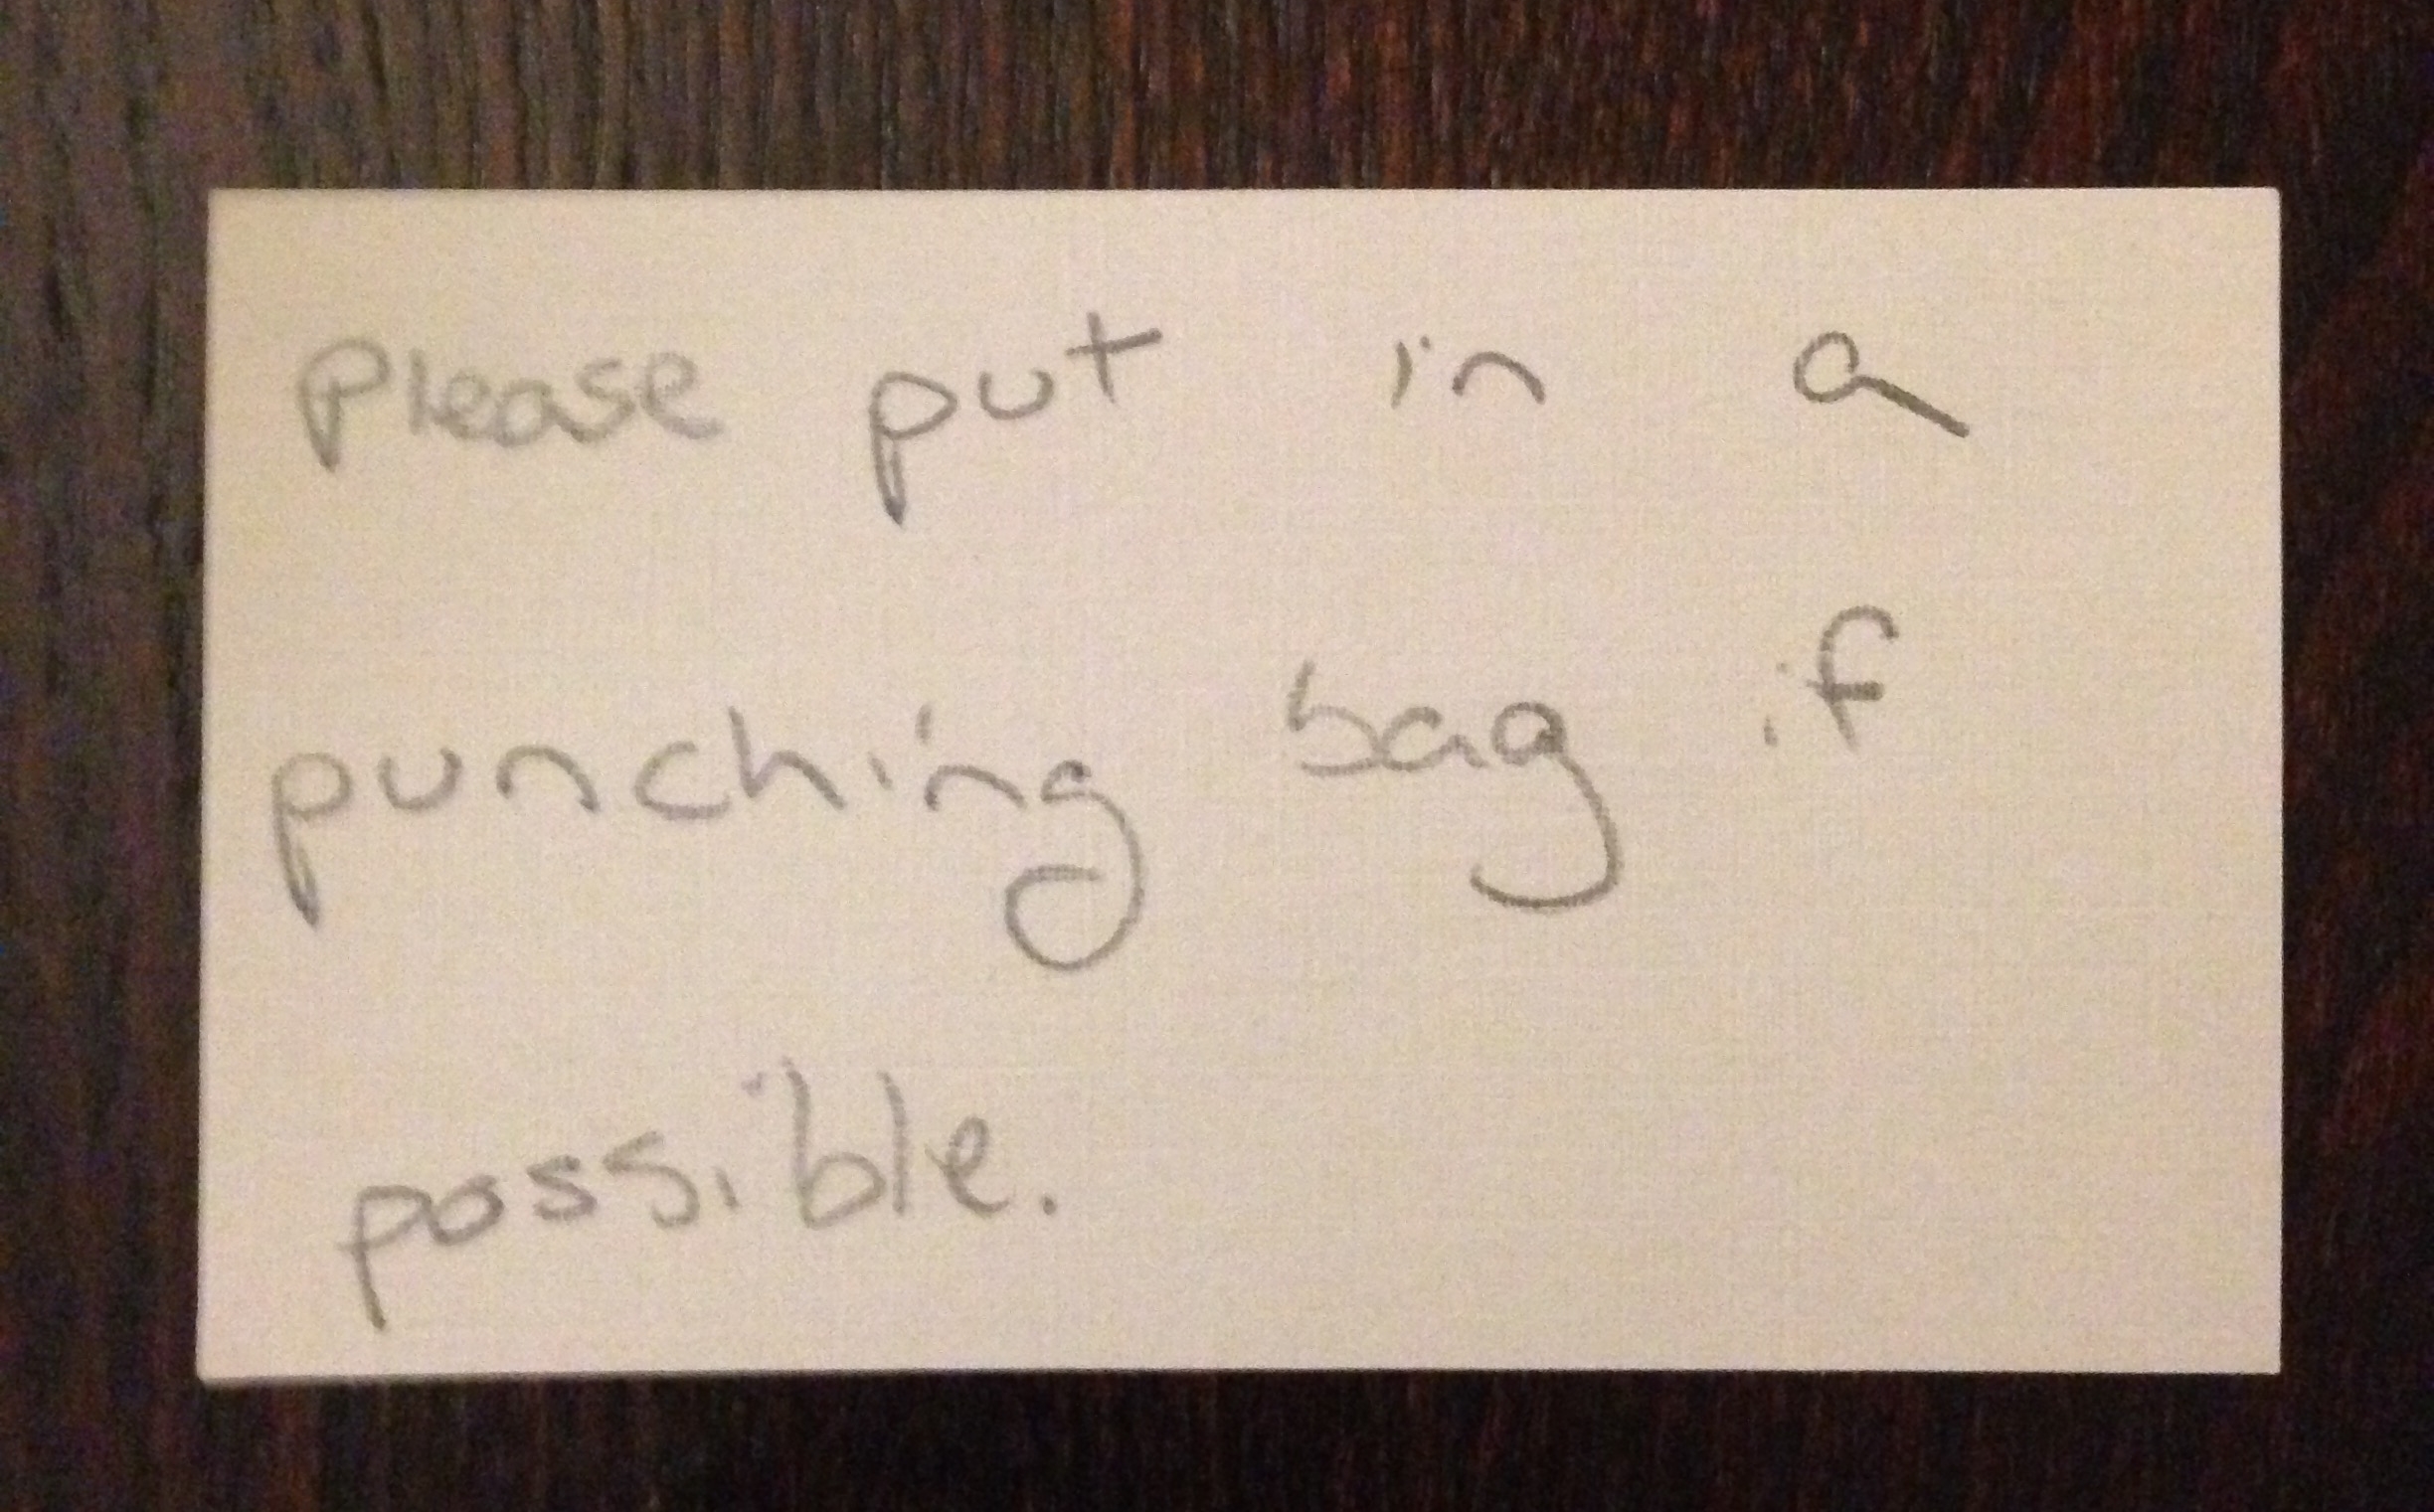 "Please put in a punching bag if possible."